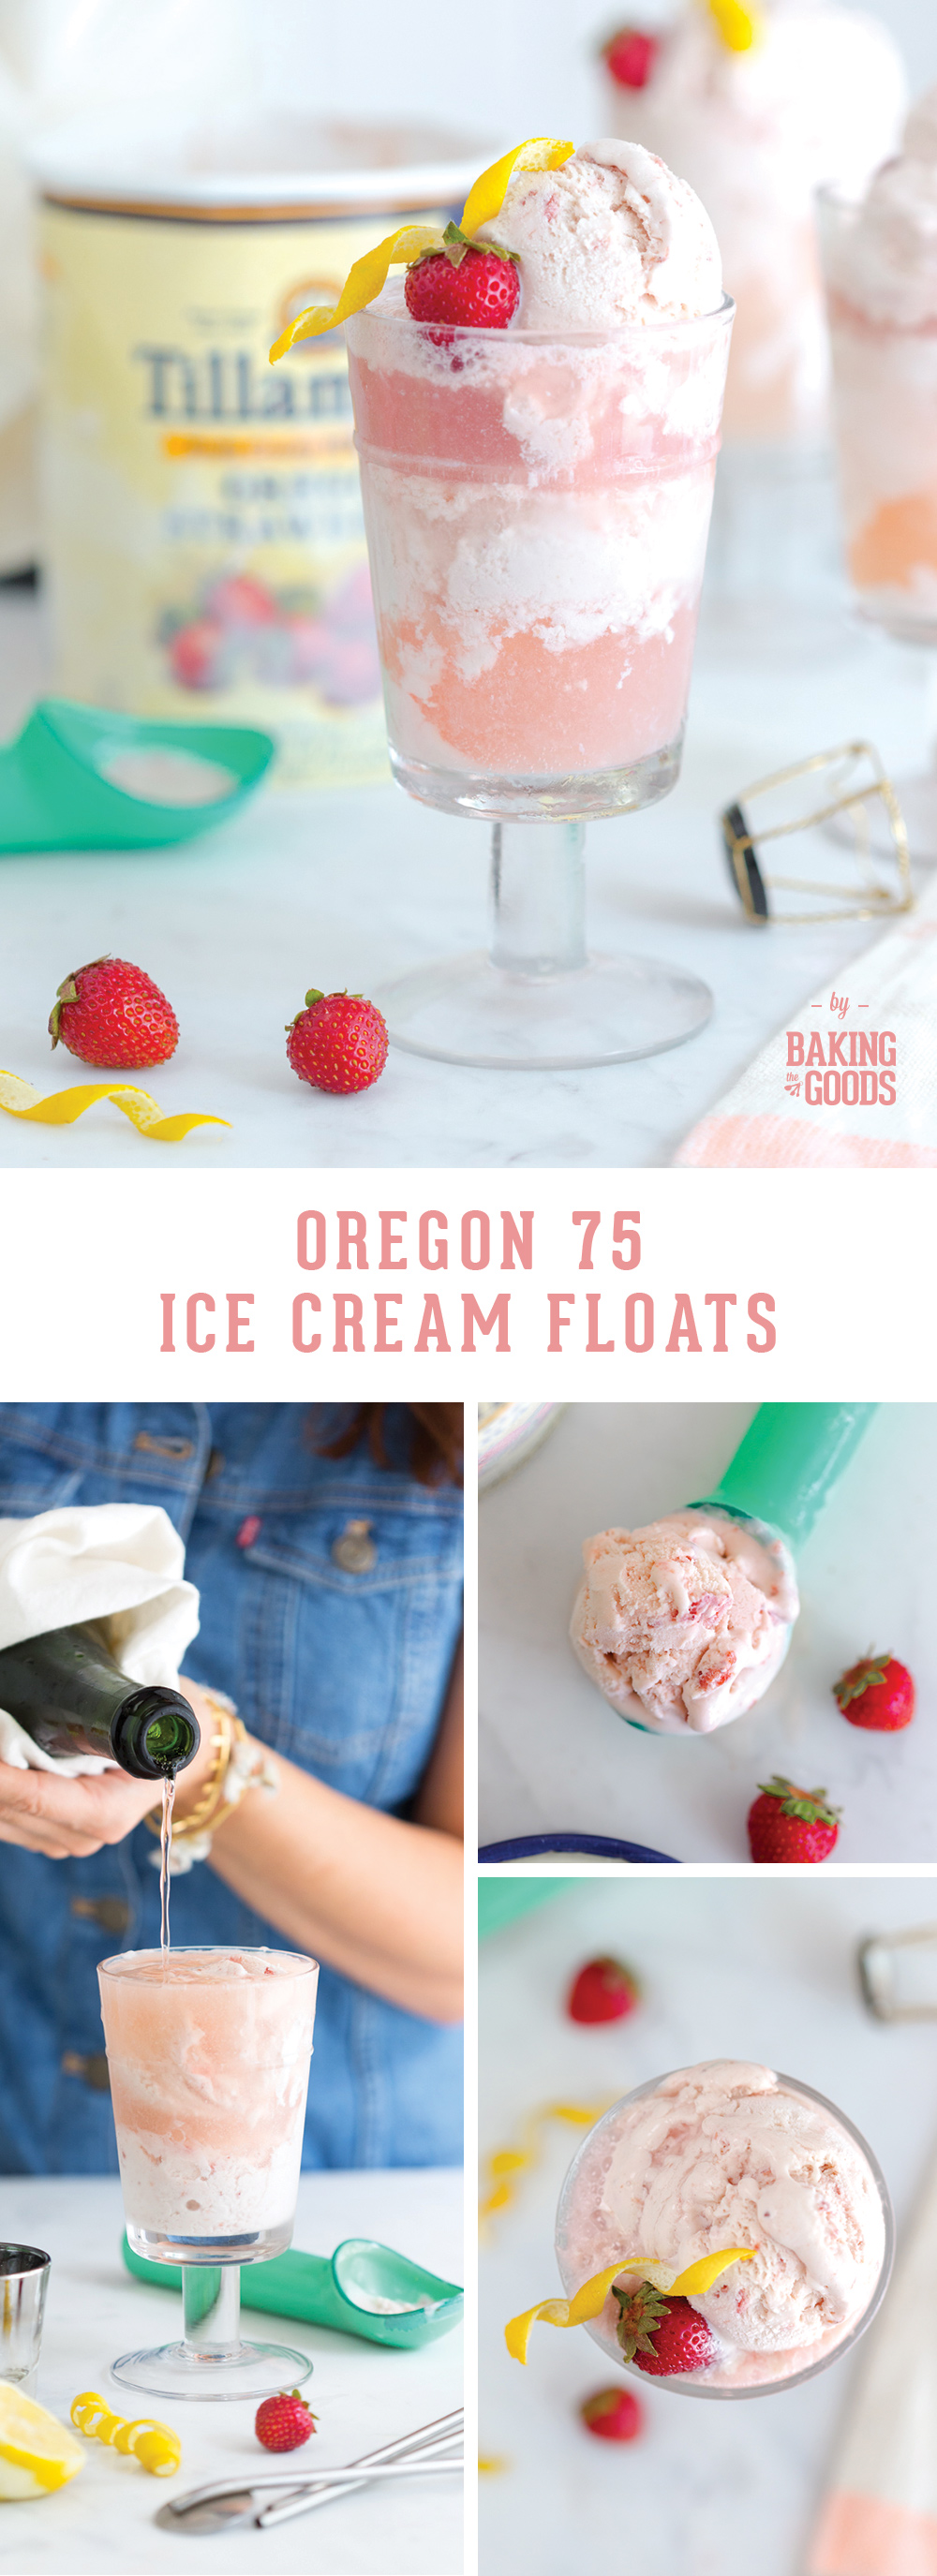 Oregon 75 Ice Cream Floats by Baking The Goods